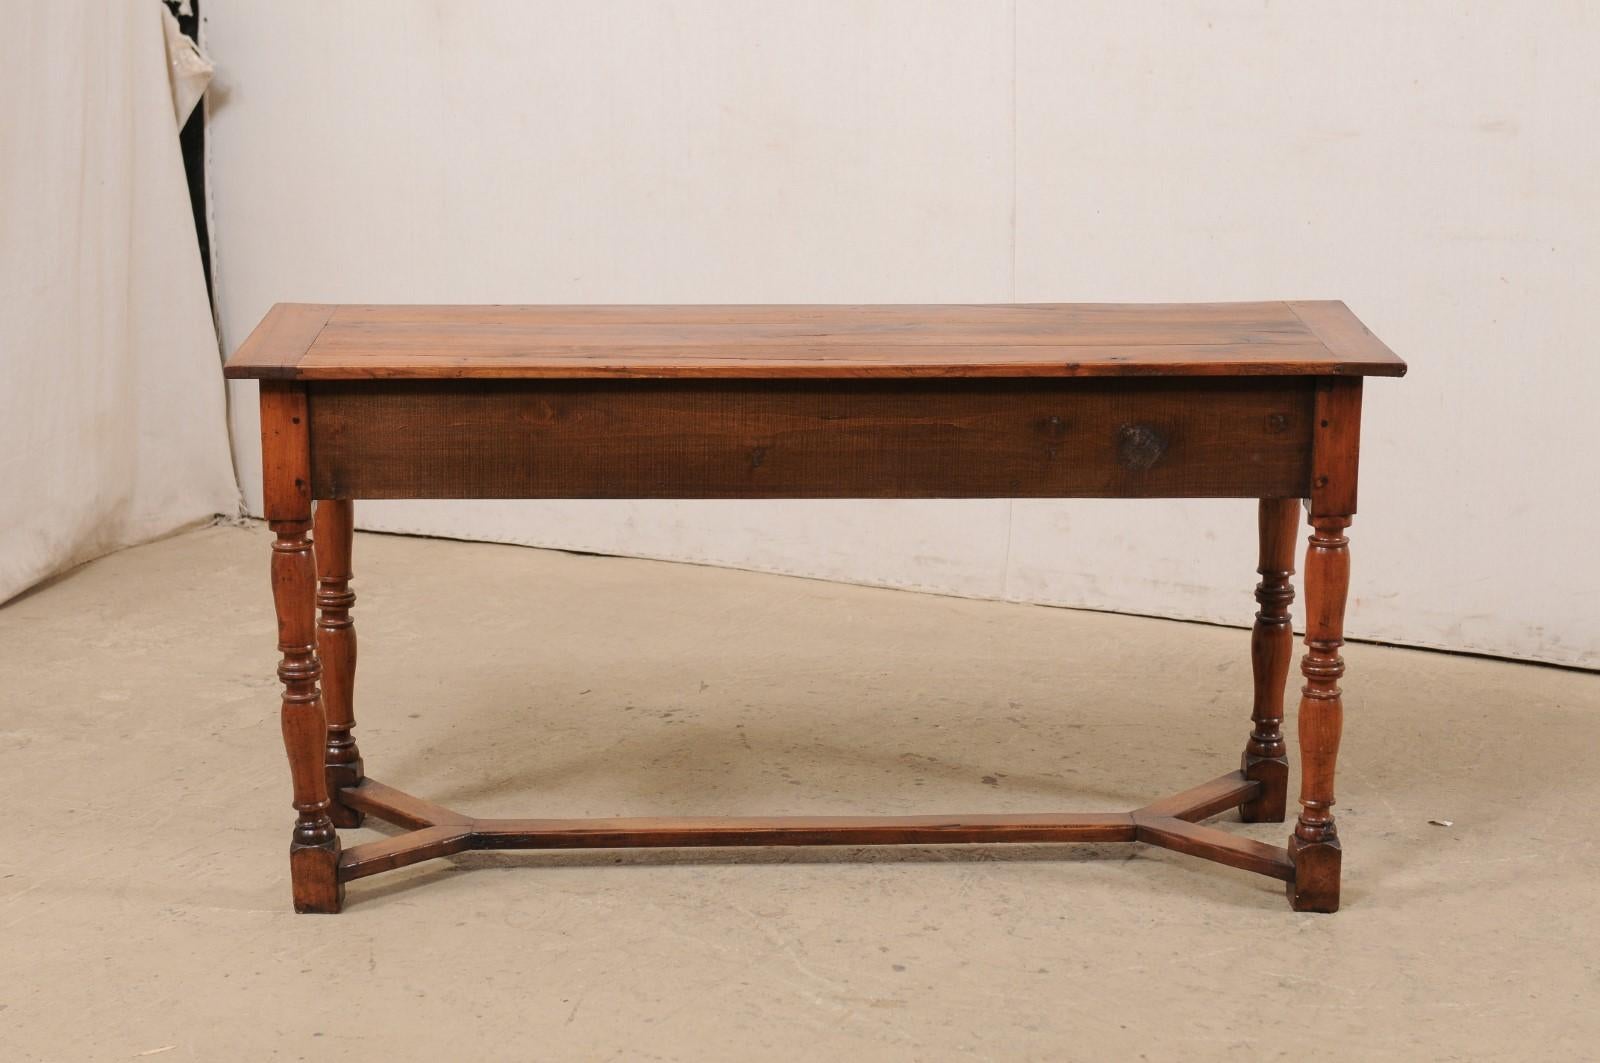 19th C. English Wooden Sofa or Console Table w/ 3 Drawers and Nicely Turned Legs 4